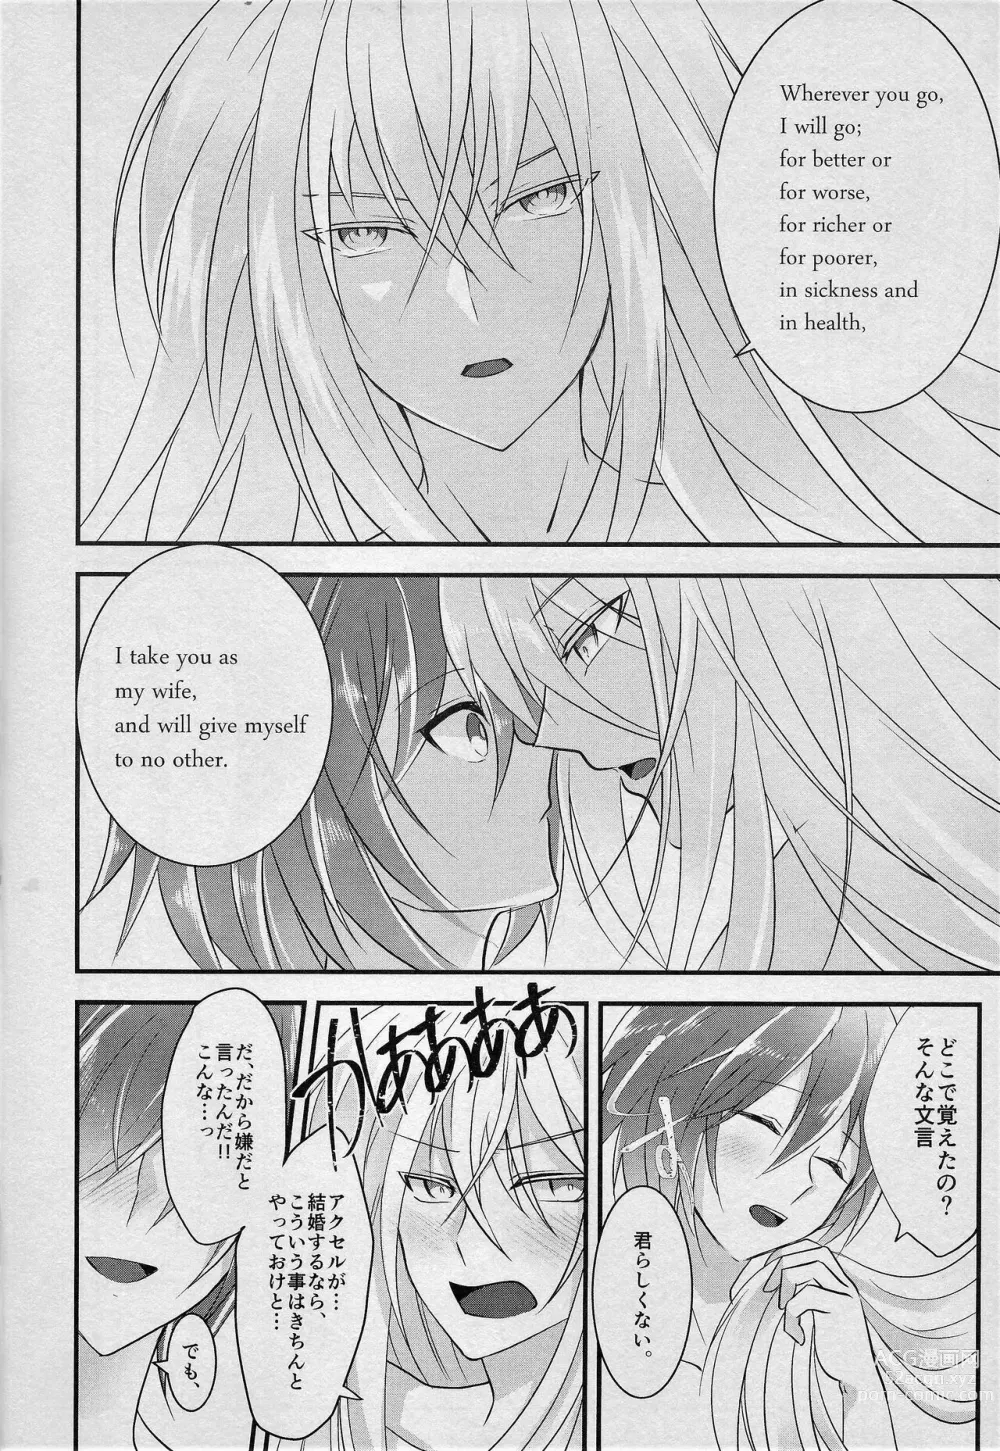 Page 15 of doujinshi JUST MARRIED